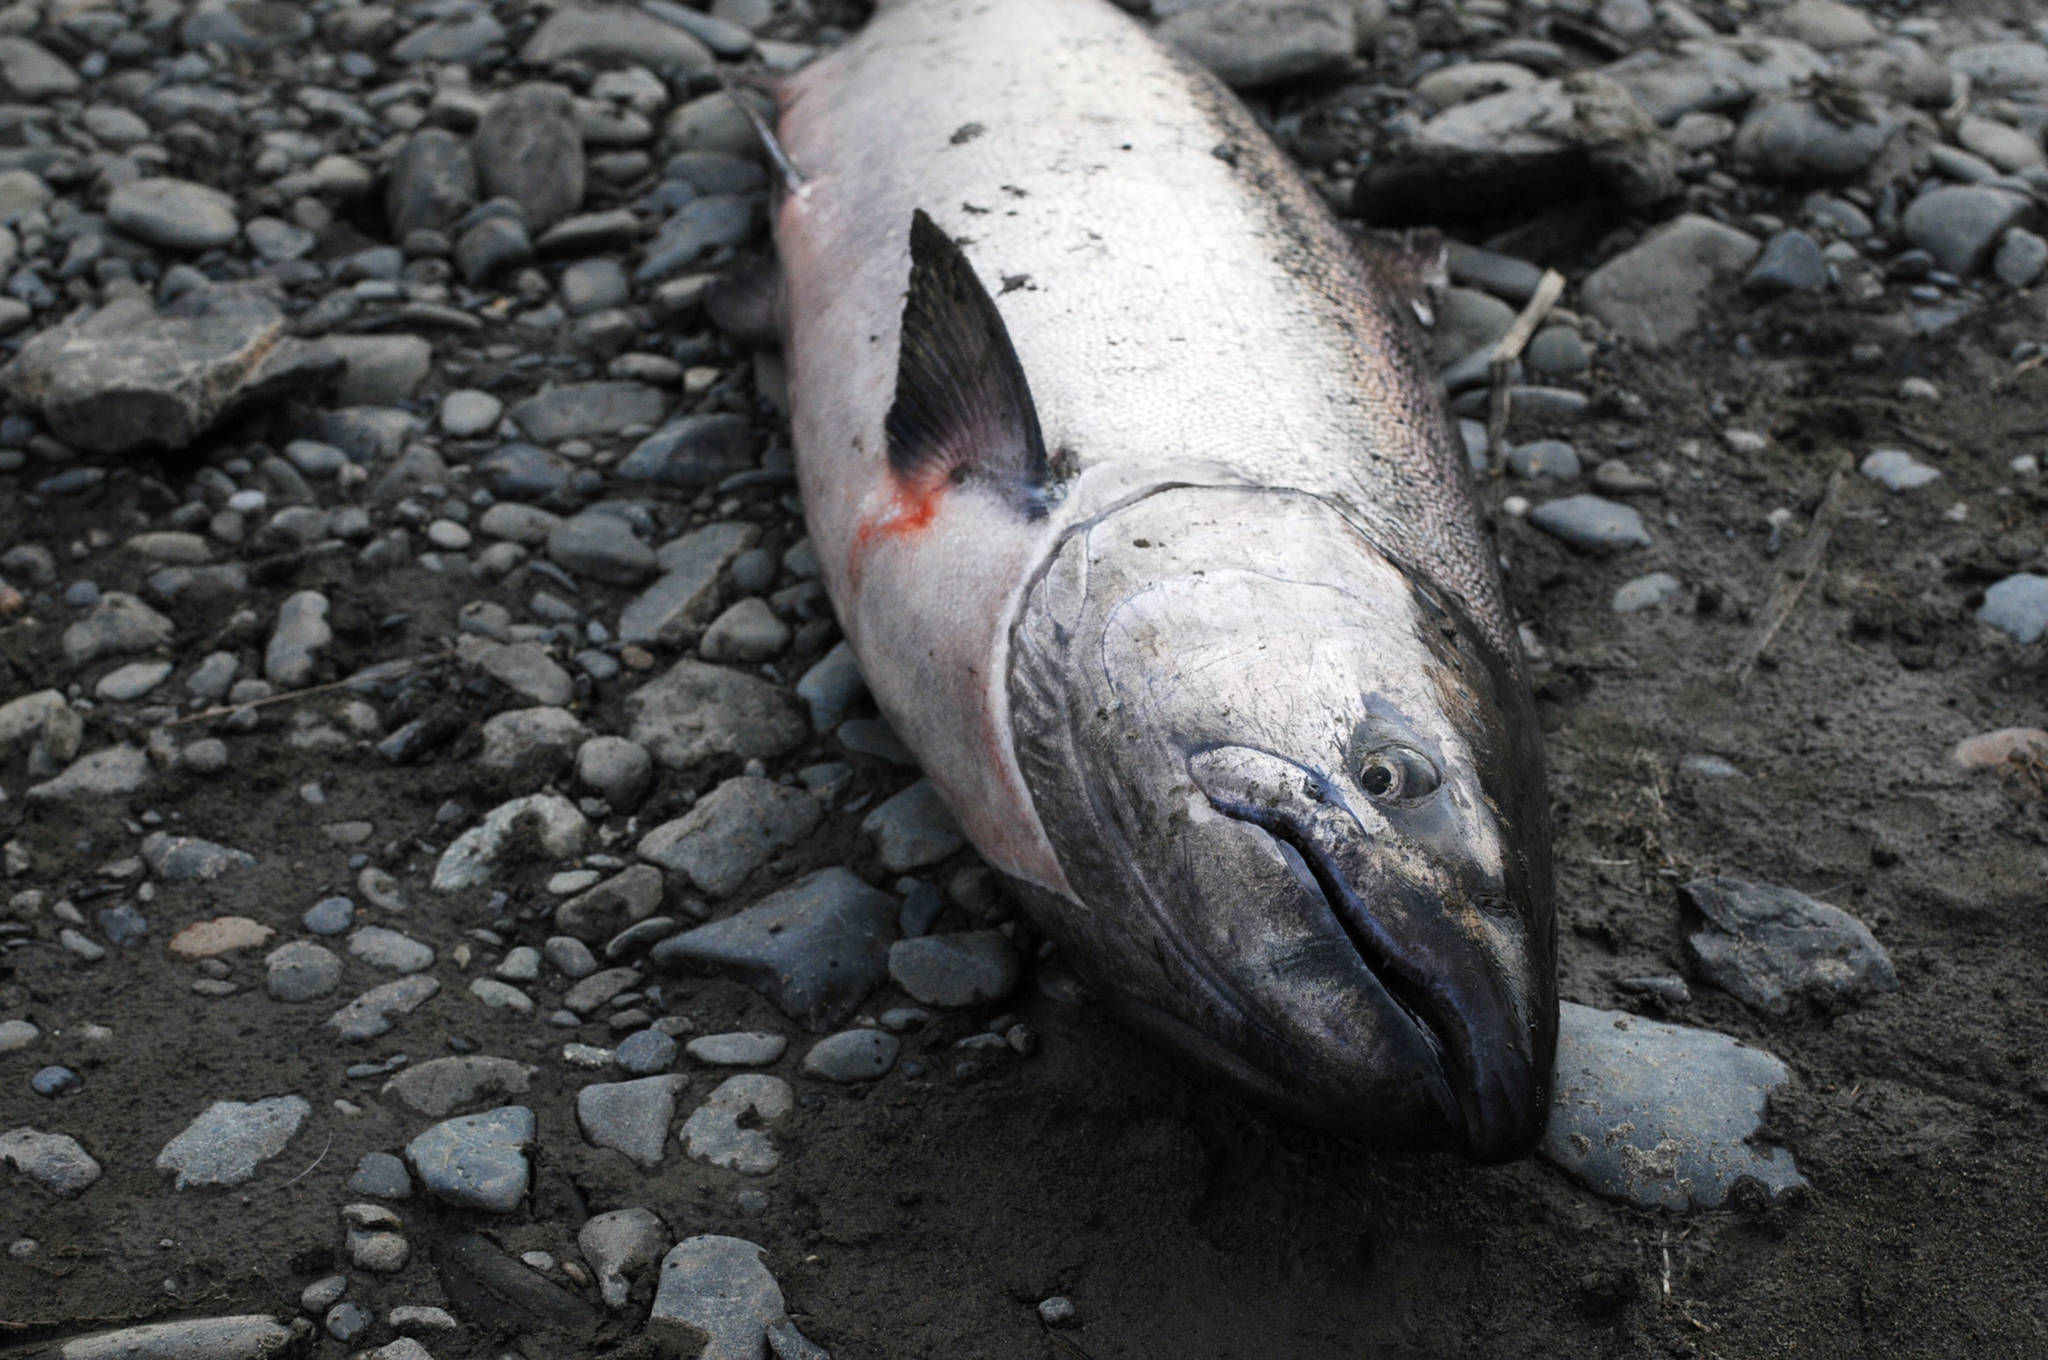 An Anchor River king salmon lies on the bank Saturday, May 19, 2018 in Anchor Point, Alaska. (Photo by Elizabeth Earl/Peninsula Clarion)